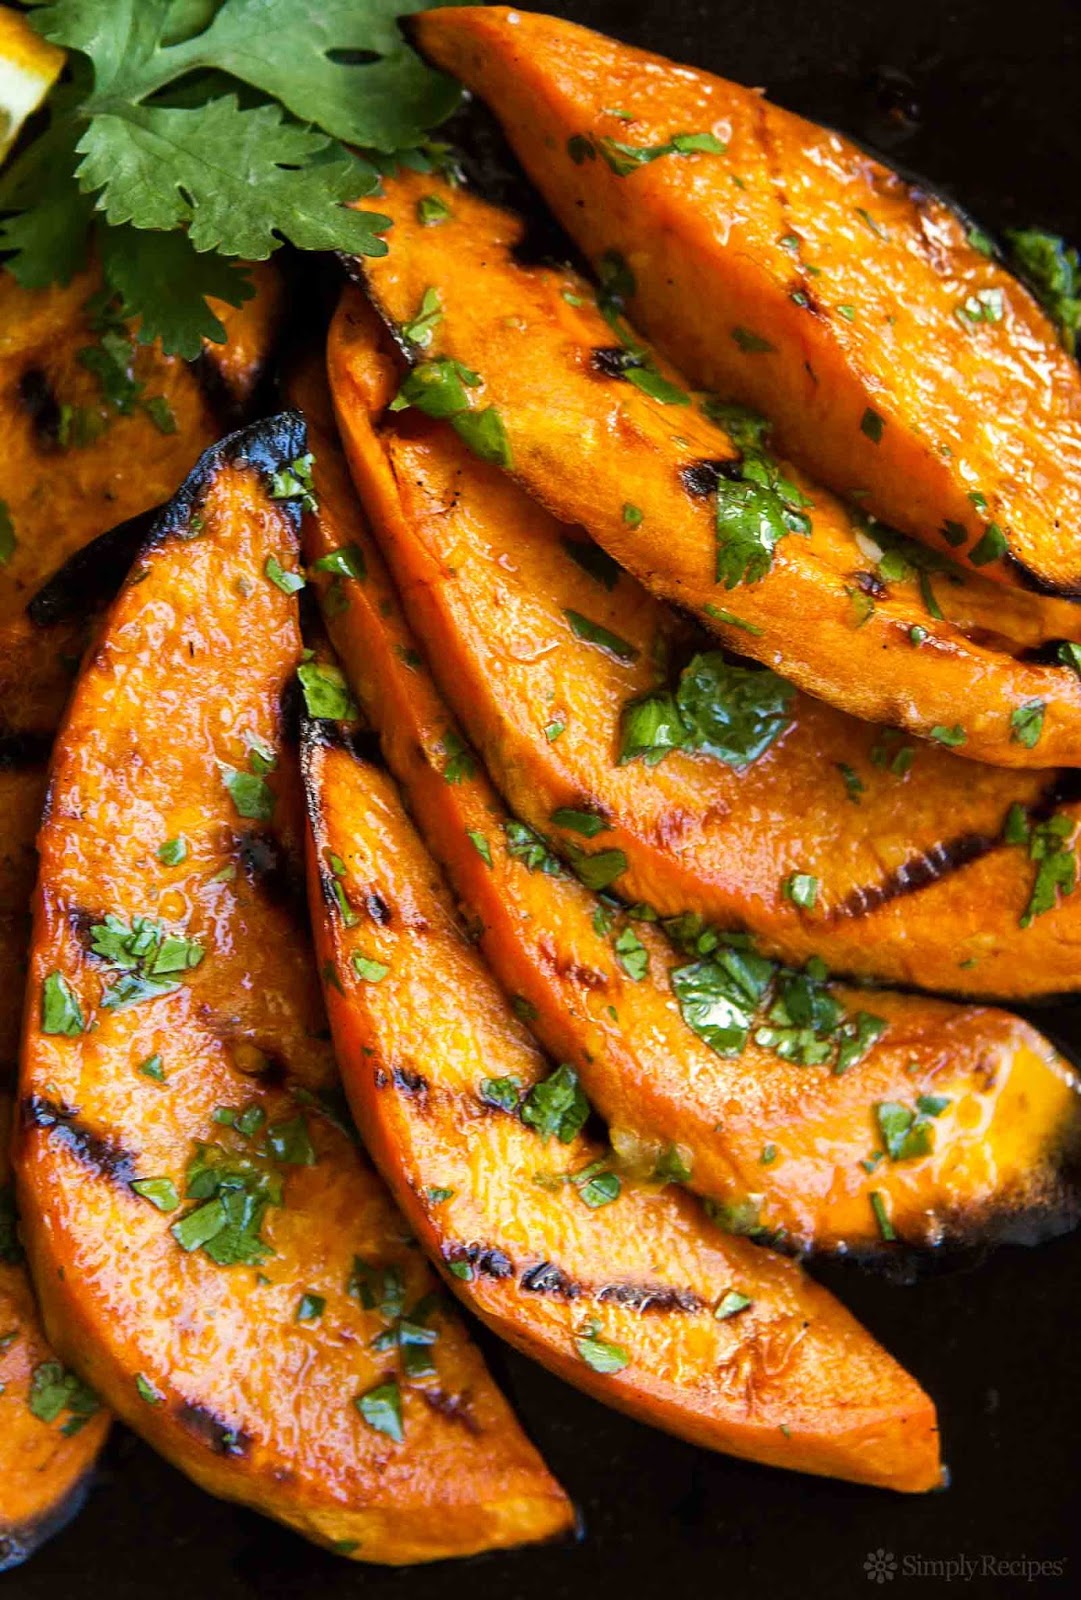 Grill Up These Best Vegetarian Grilling Recipes